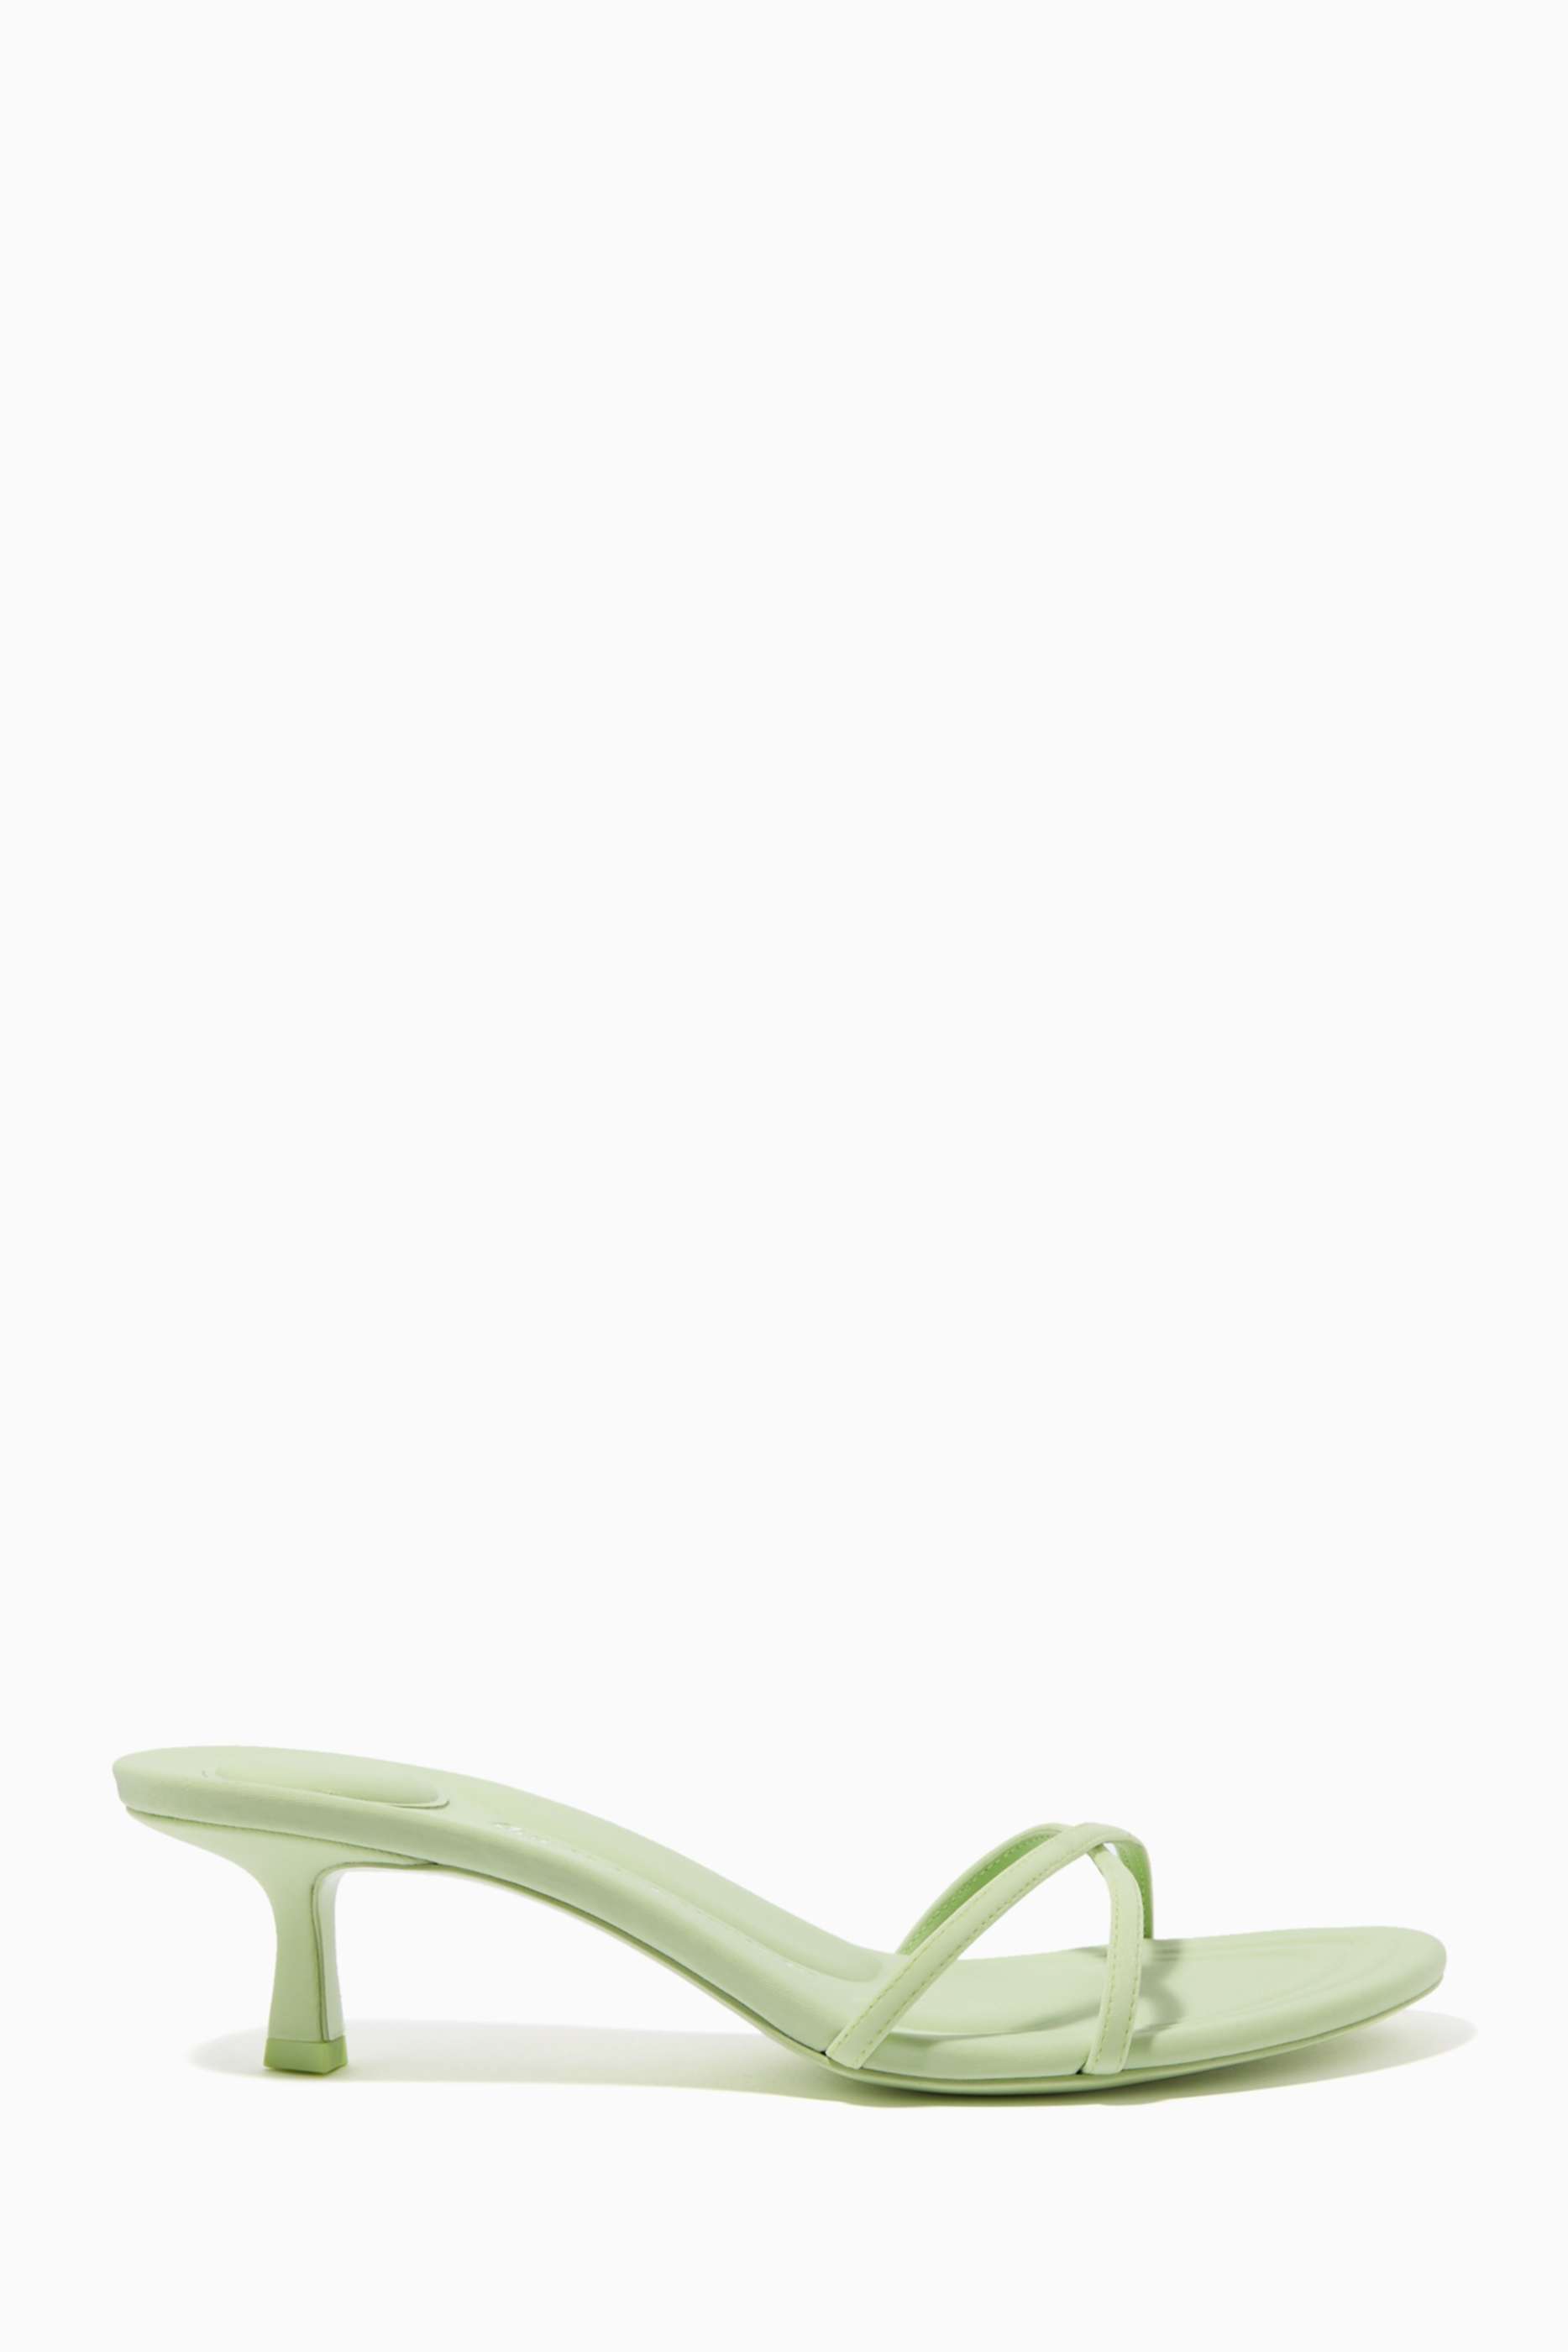 shop-alexander-wang-dahlia-mules-in-leather-for-women